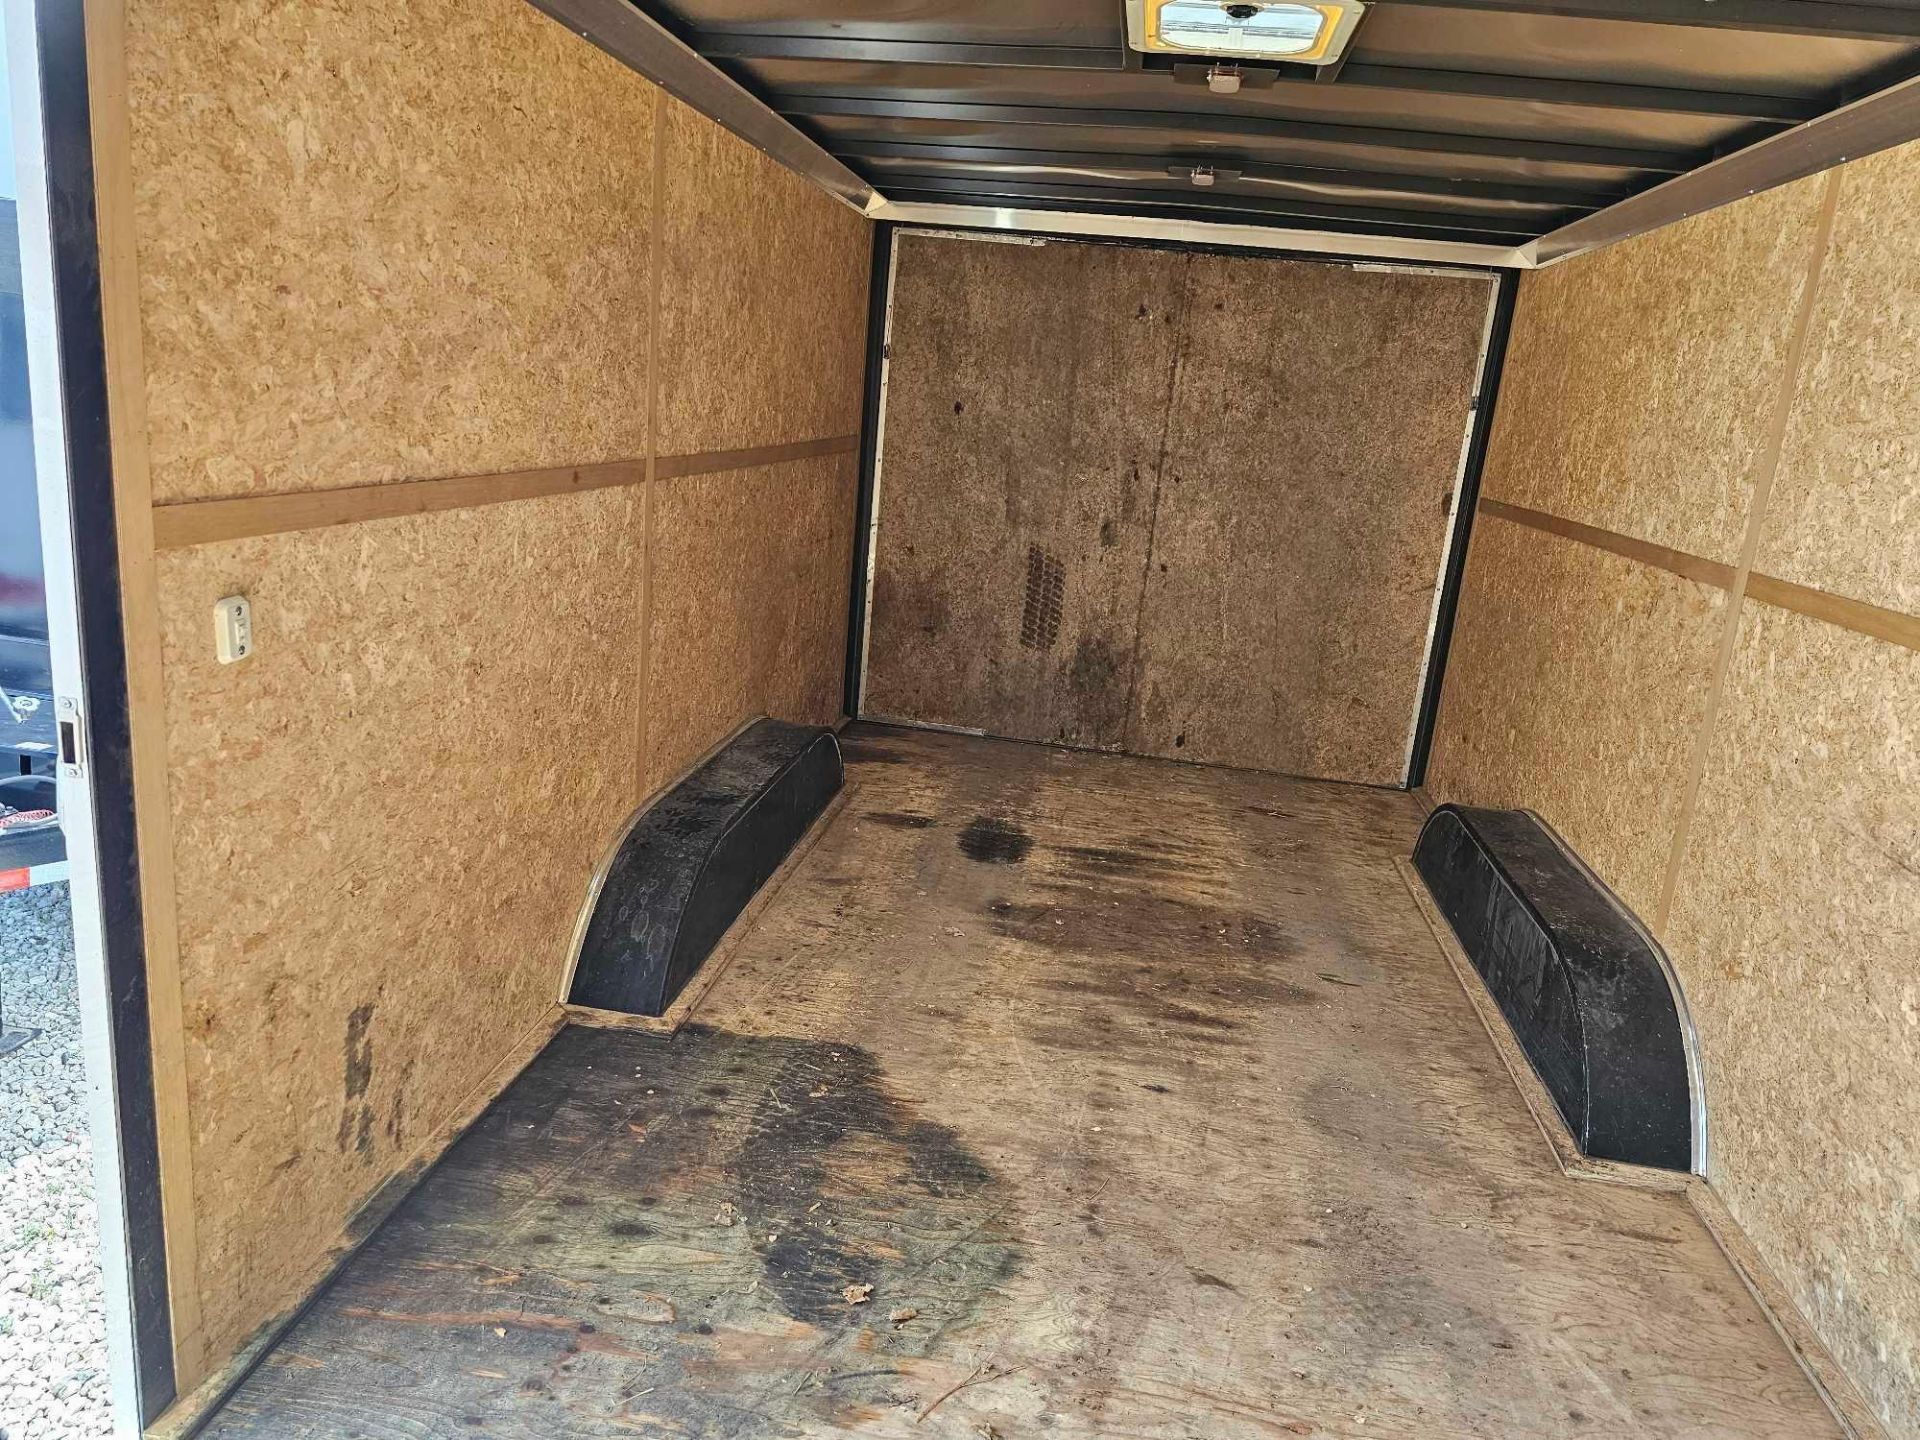 2019 Charmac Enclosed Trailer 18x100" - Image 10 of 14